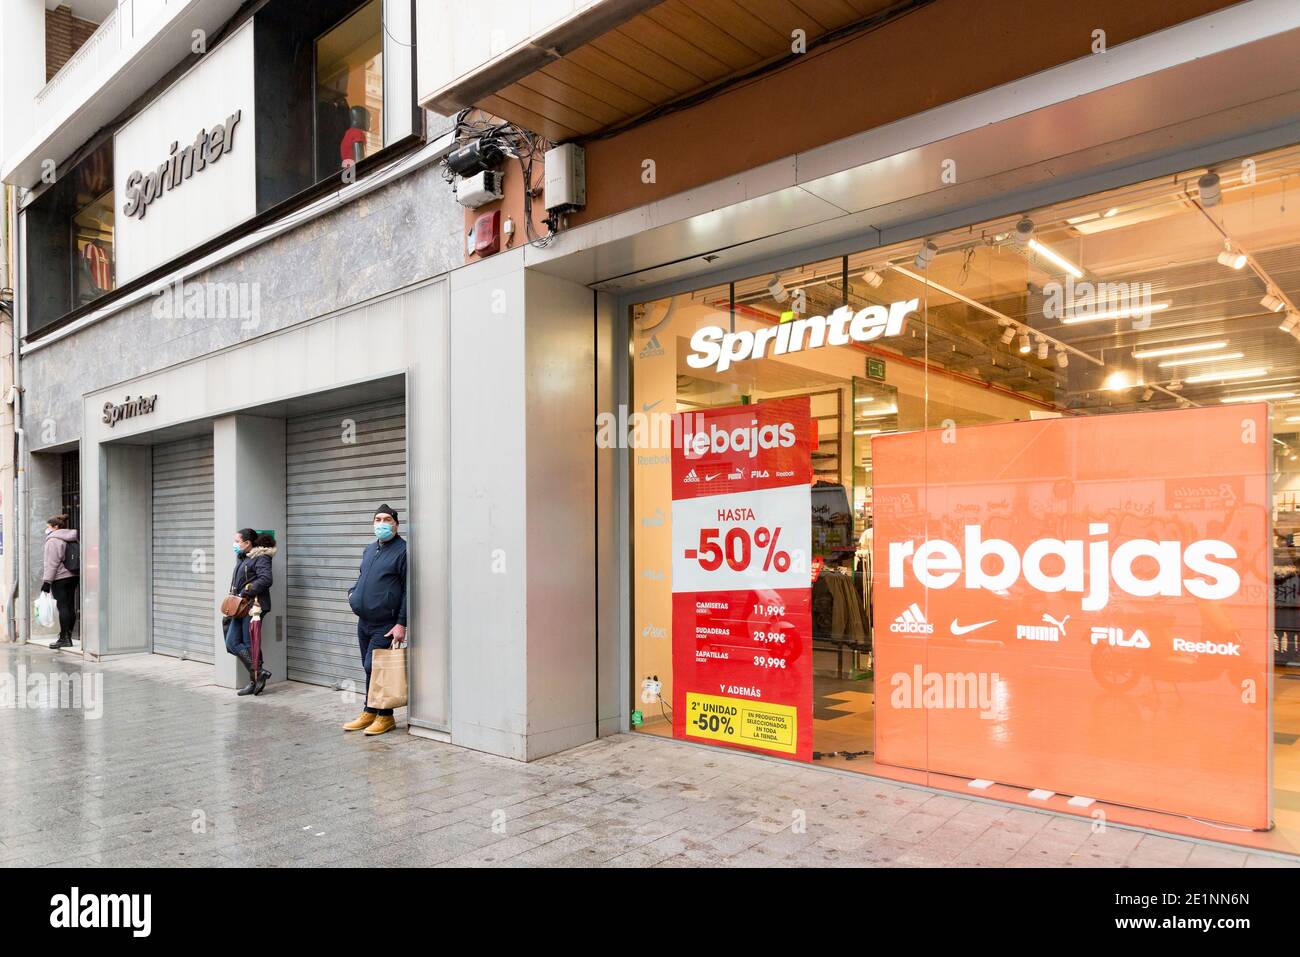 Valencia, Spain. 8th Jan, 2021. People wait in front of the Sprinter store  during the winter sales.In the last weeks of Christmas, the cases of  Covid19 in Valencia have increased, this has